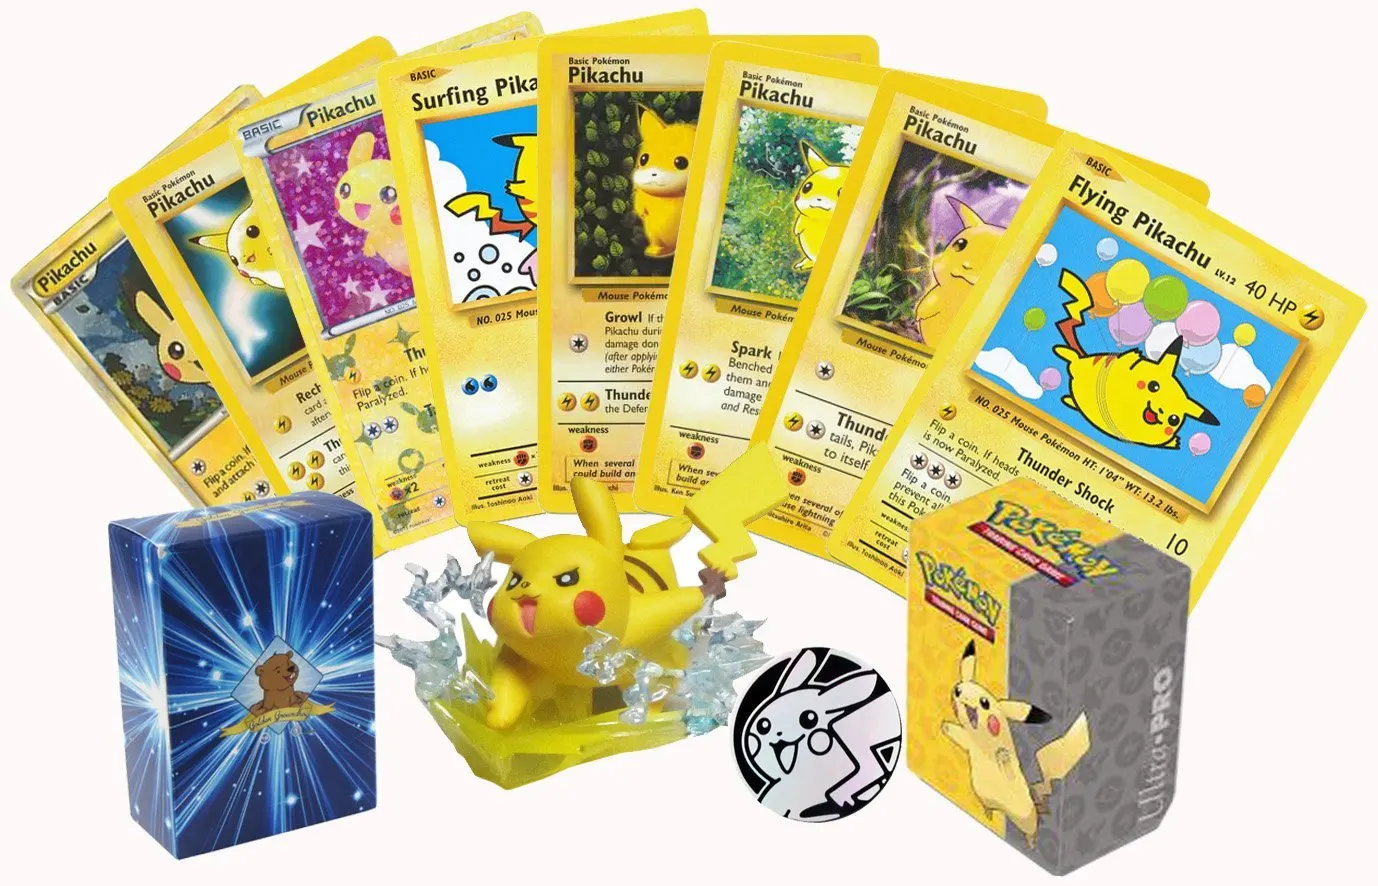 Pokemon Super Pikachu Bundle Featuring Flying Pikachu And Surfing Pikachu Includes Coin Pikachu Deckbox Figure May Include Rares And Foils